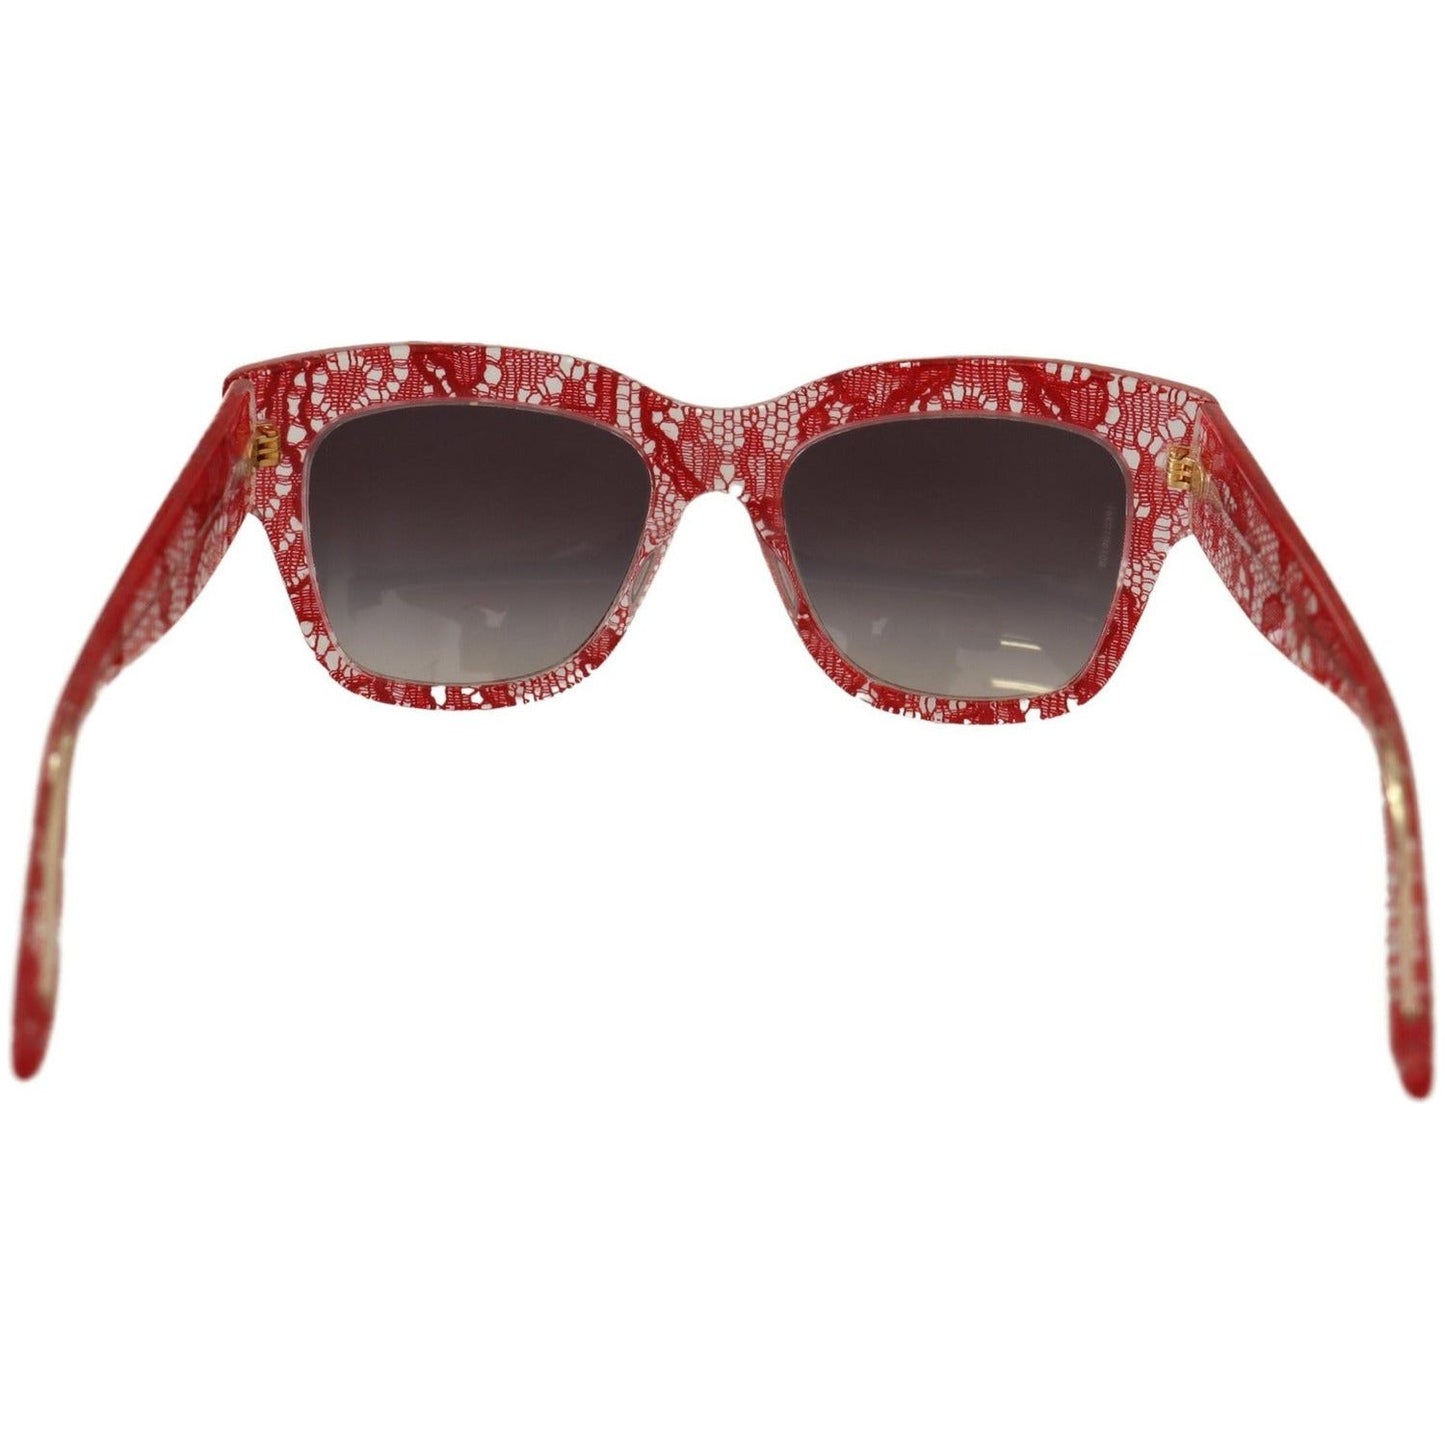 Dolce & Gabbana Sicilian Lace-Inspired Red Sunglasses red-lace-acetate-rectangle-shades-sunglasses-1 IMG_5739-scaled-2490b5de-032.jpg